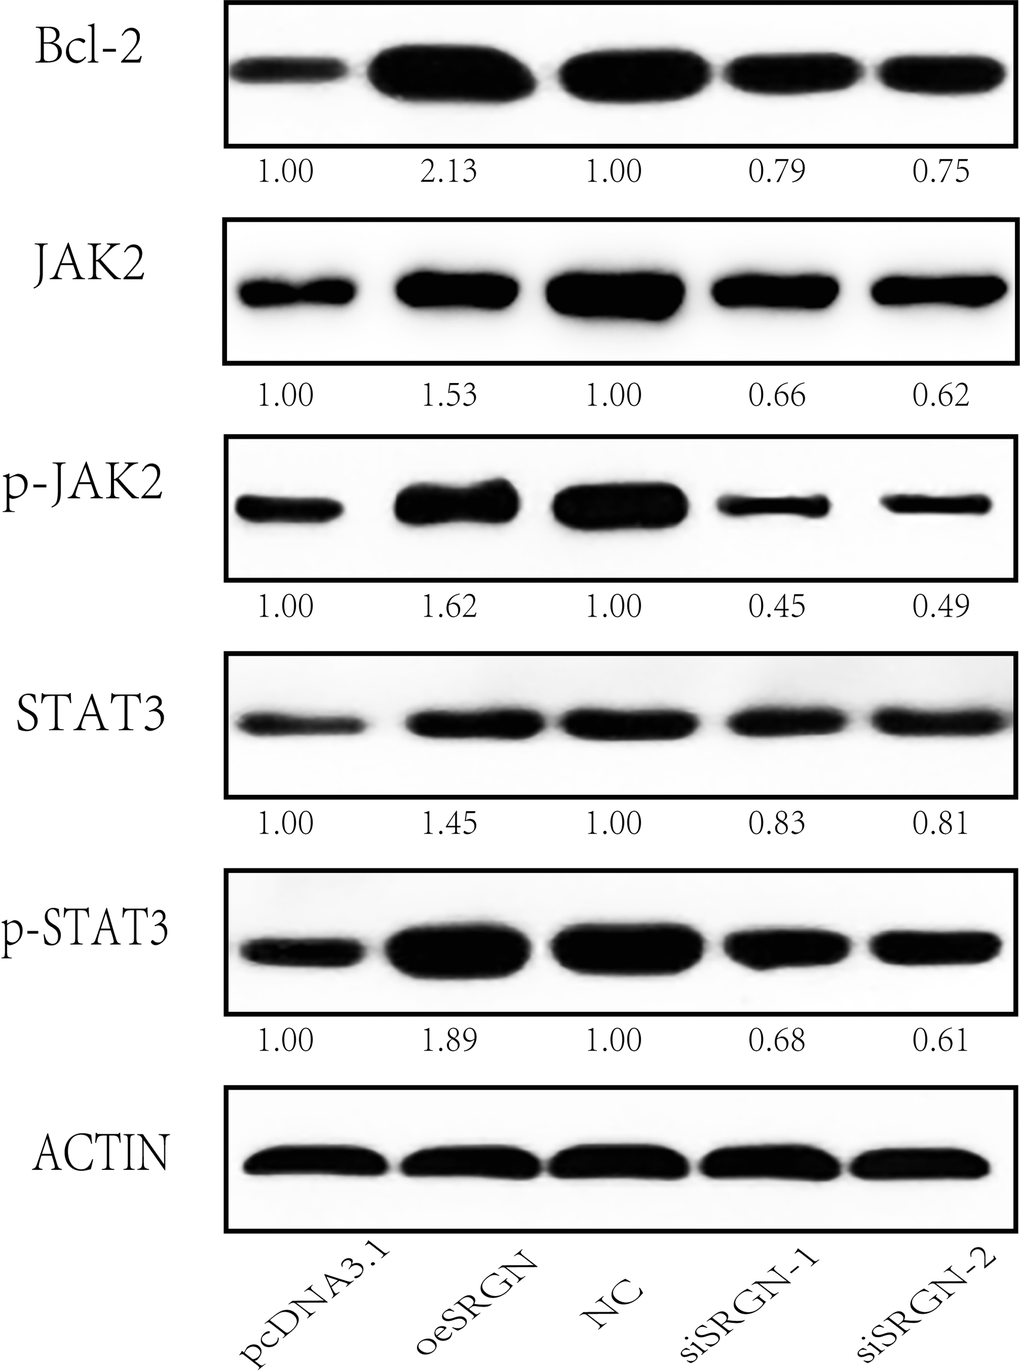 SRGN affects the JAK/STAT signaling pathway in 143B cells. Western blot analysis of the expression of Bcl-2, JAK2, p-JAK2, STAT3, p-STAT3, and ACTIN. pcDNA3.1, means MOCK transfection with pcDNA3.1, and it was used as the empty control of the overexpression group; NC, negative control used as the control for siRNA experiments; * We set the quantized value of pcDNA3.1 and NC to 1.00. The other quantized values were compared with their respective experimental groups.